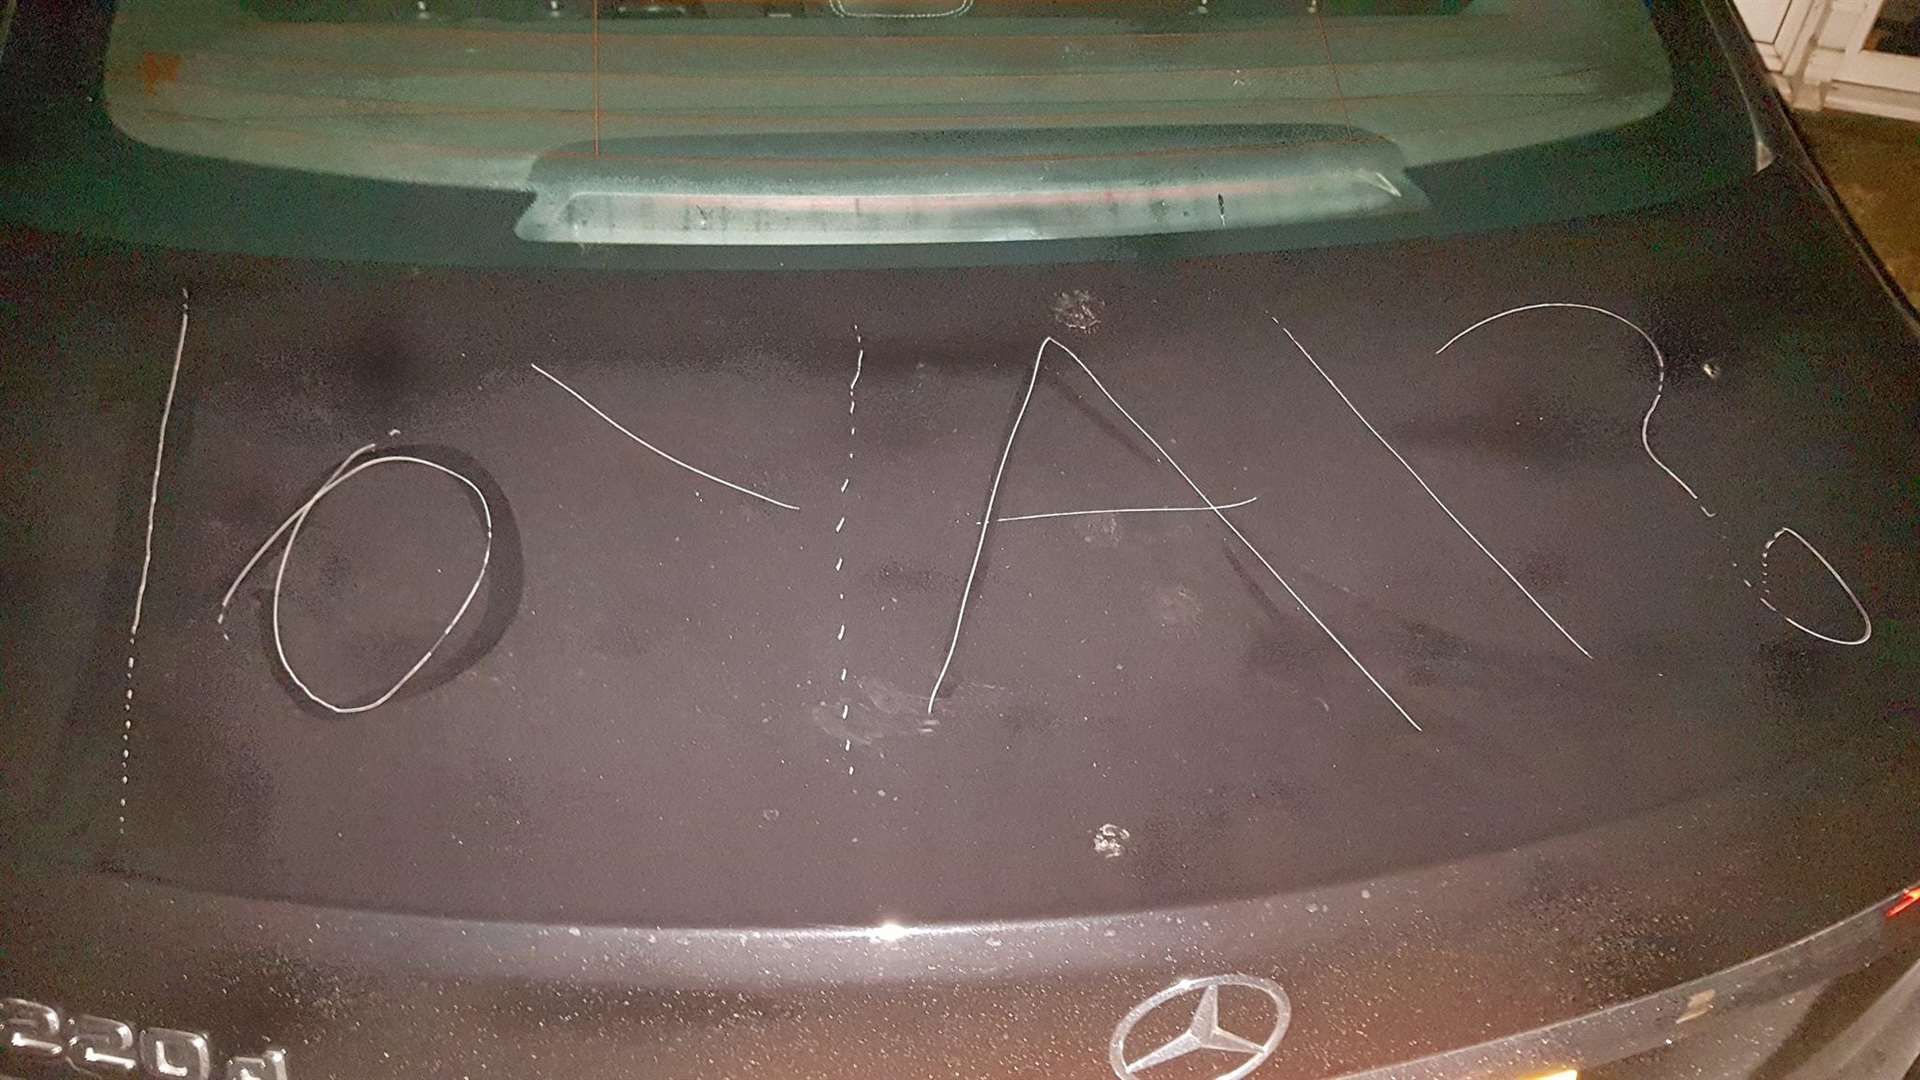 Peter Styles-Martin's car was scribed with 'loyal' in Hamilton Road (5457351)